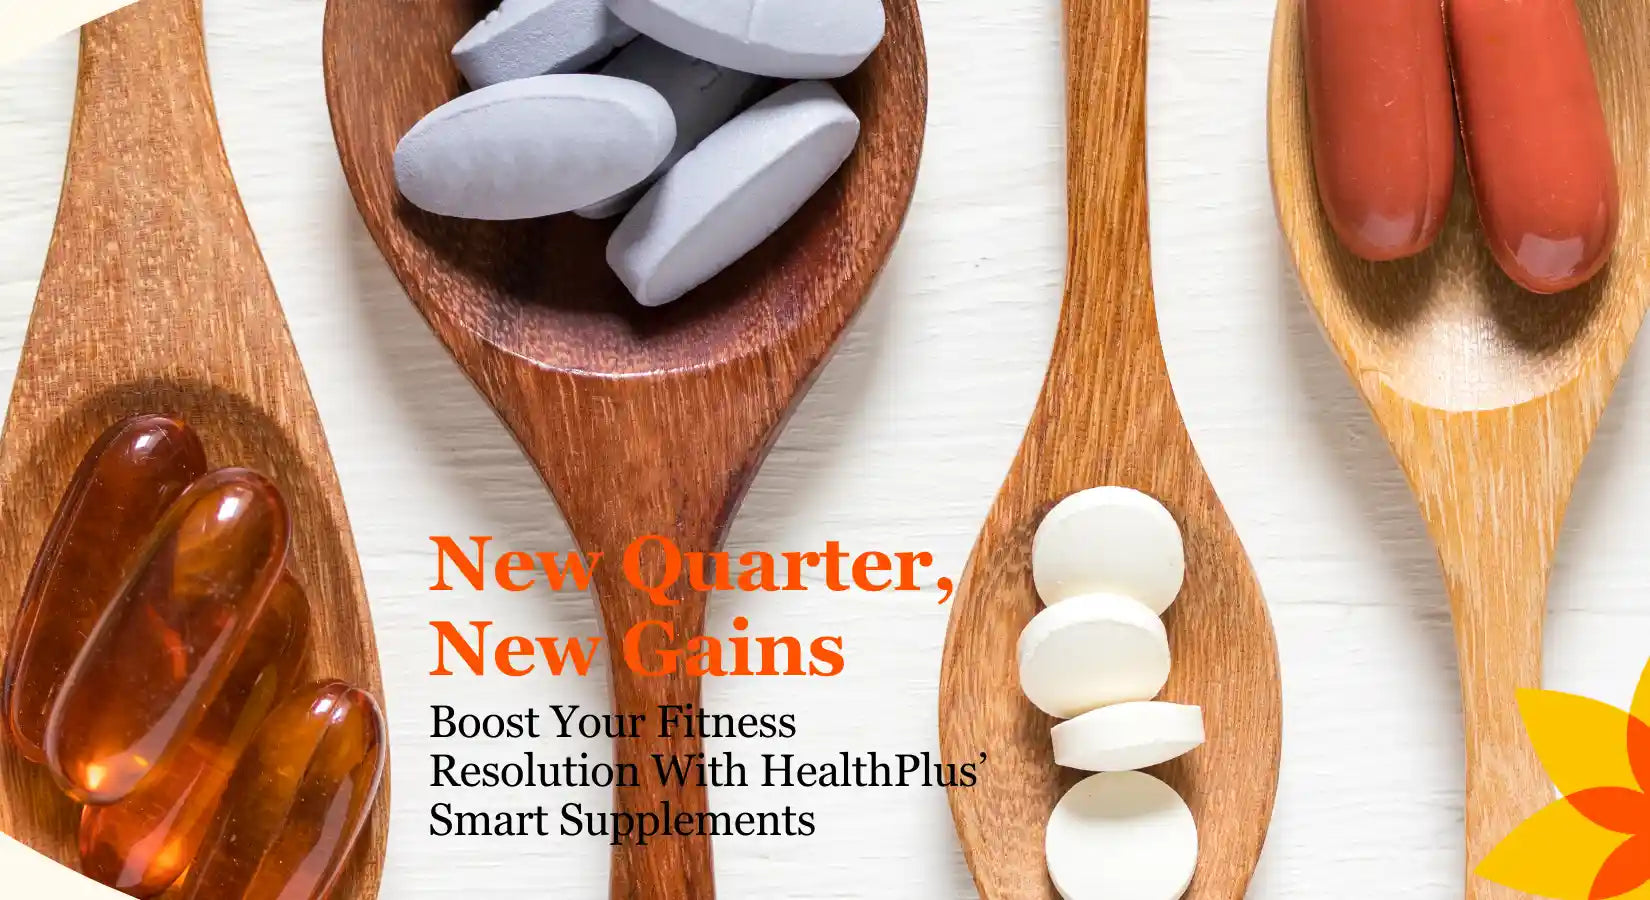 New Quarter, New Gains: Boost Your Fitness Resolution With HealthPlus’ Smart Supplements